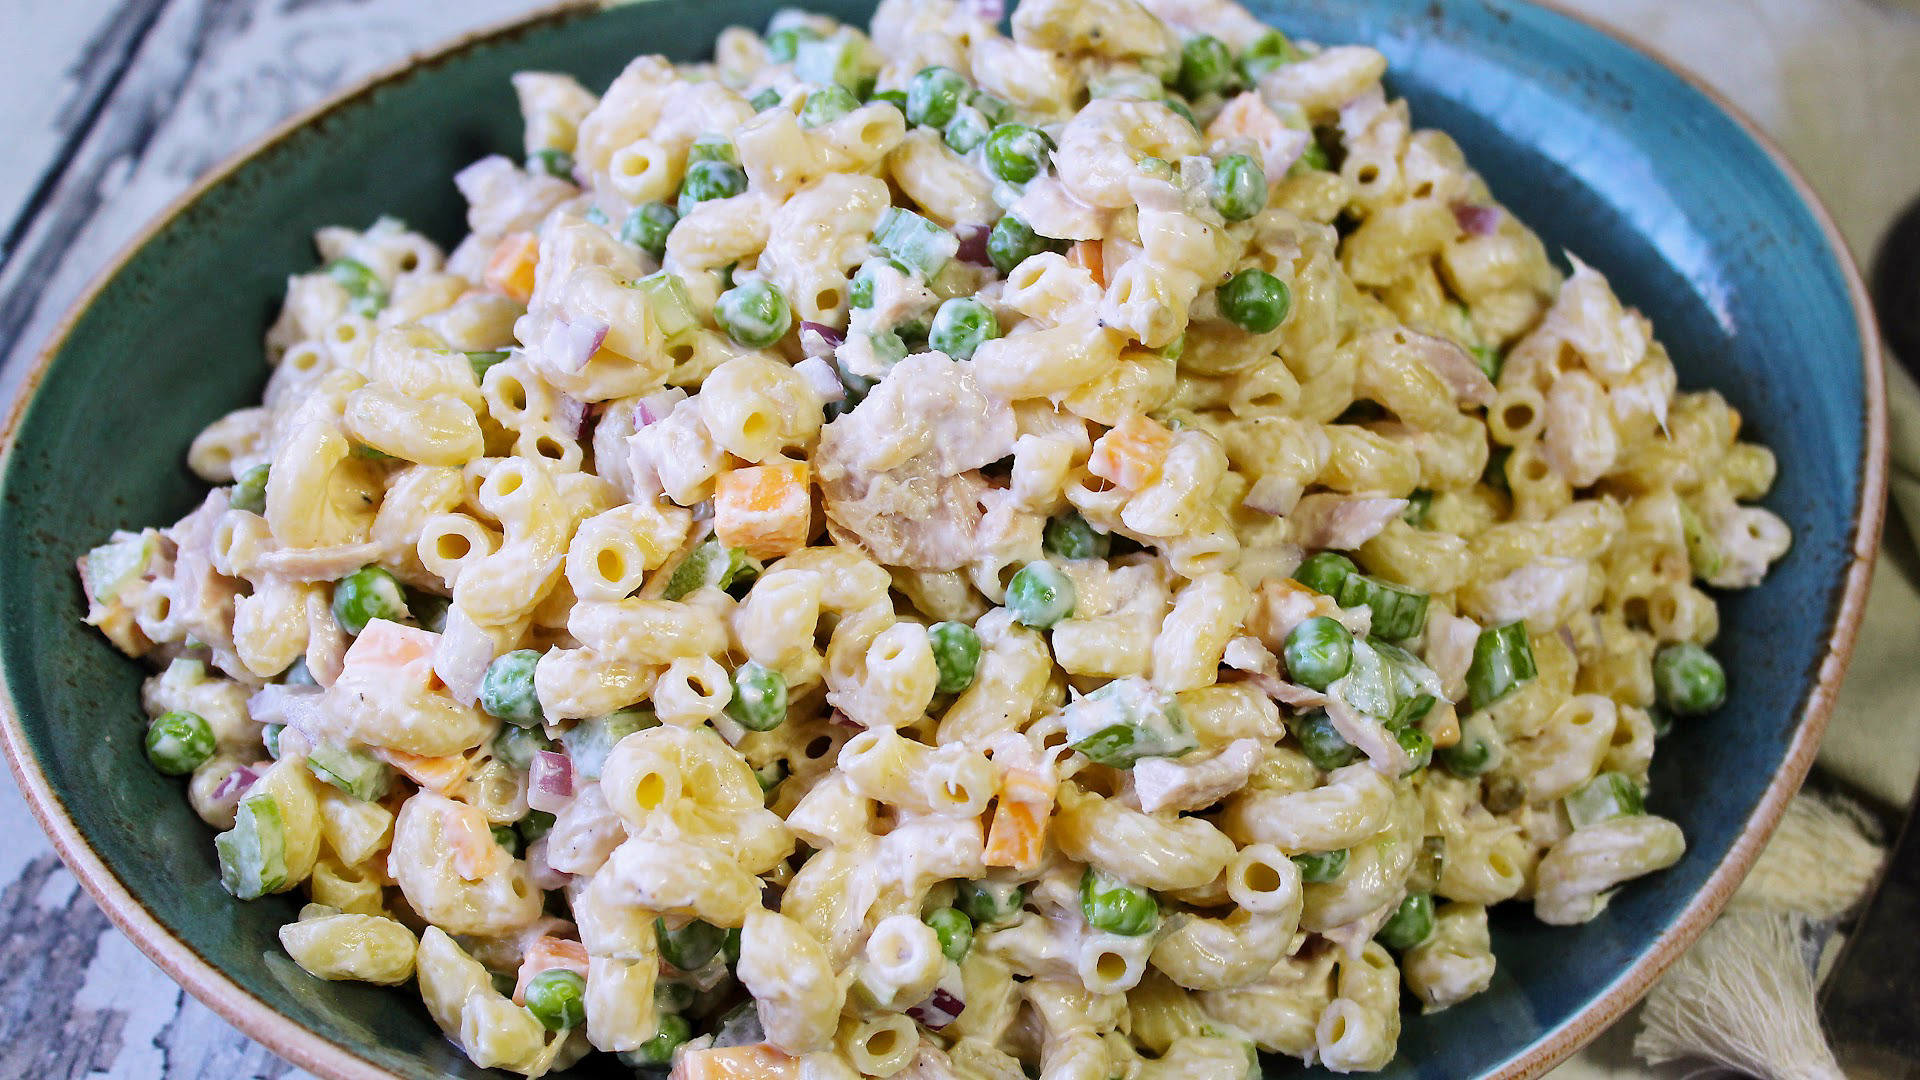 Creamy, Full Of Texture And Flavor, We Loved This Tuna Macaroni Salad ...